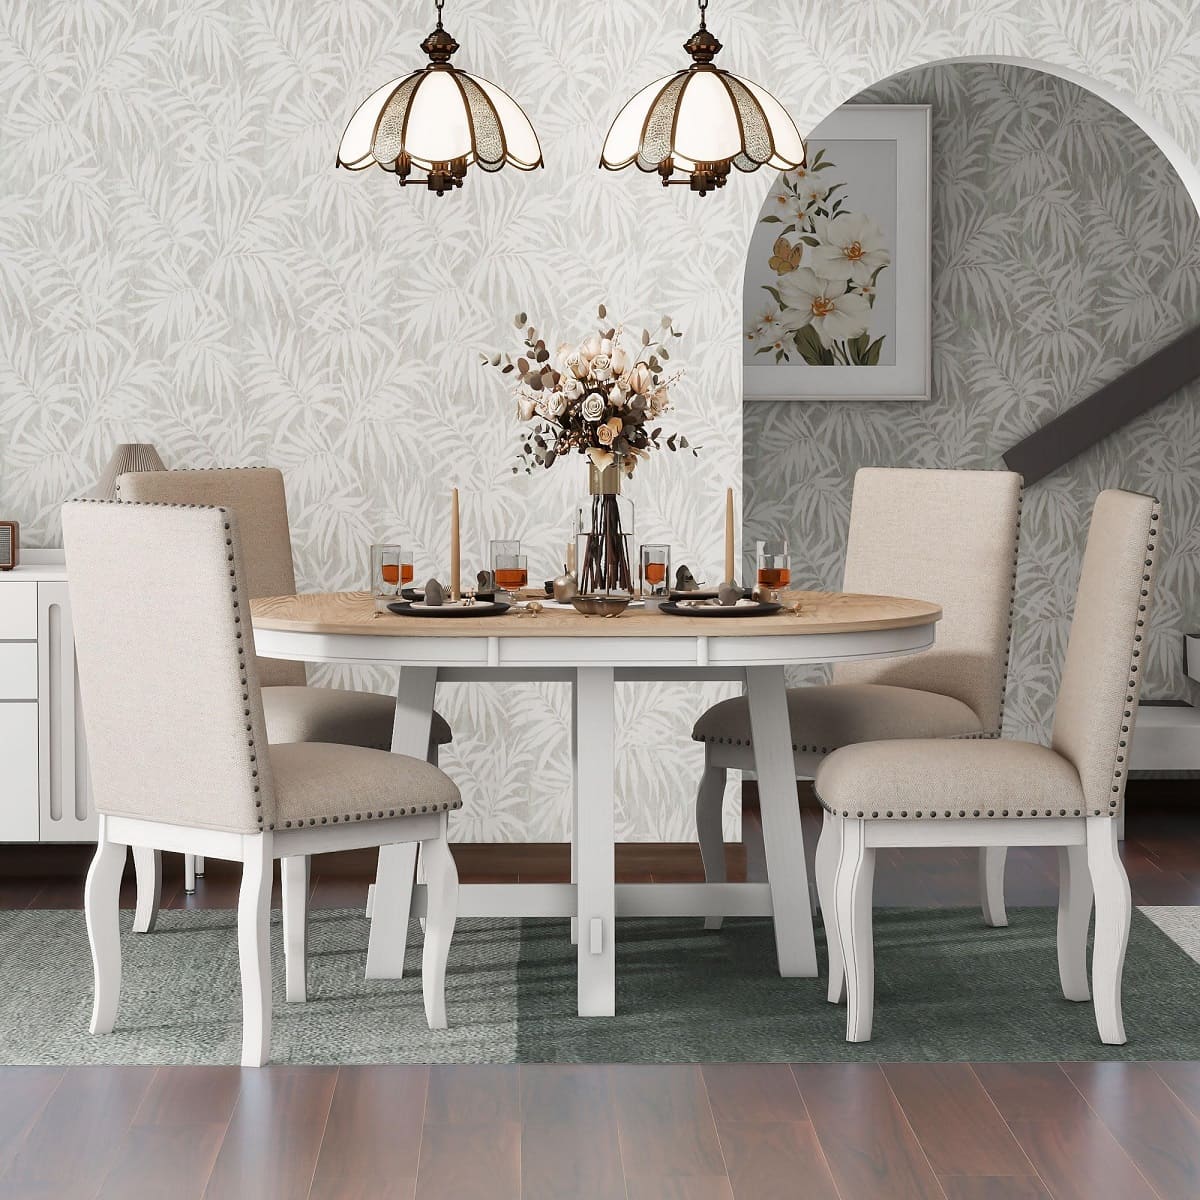 How To Decorate A Round Dining Table